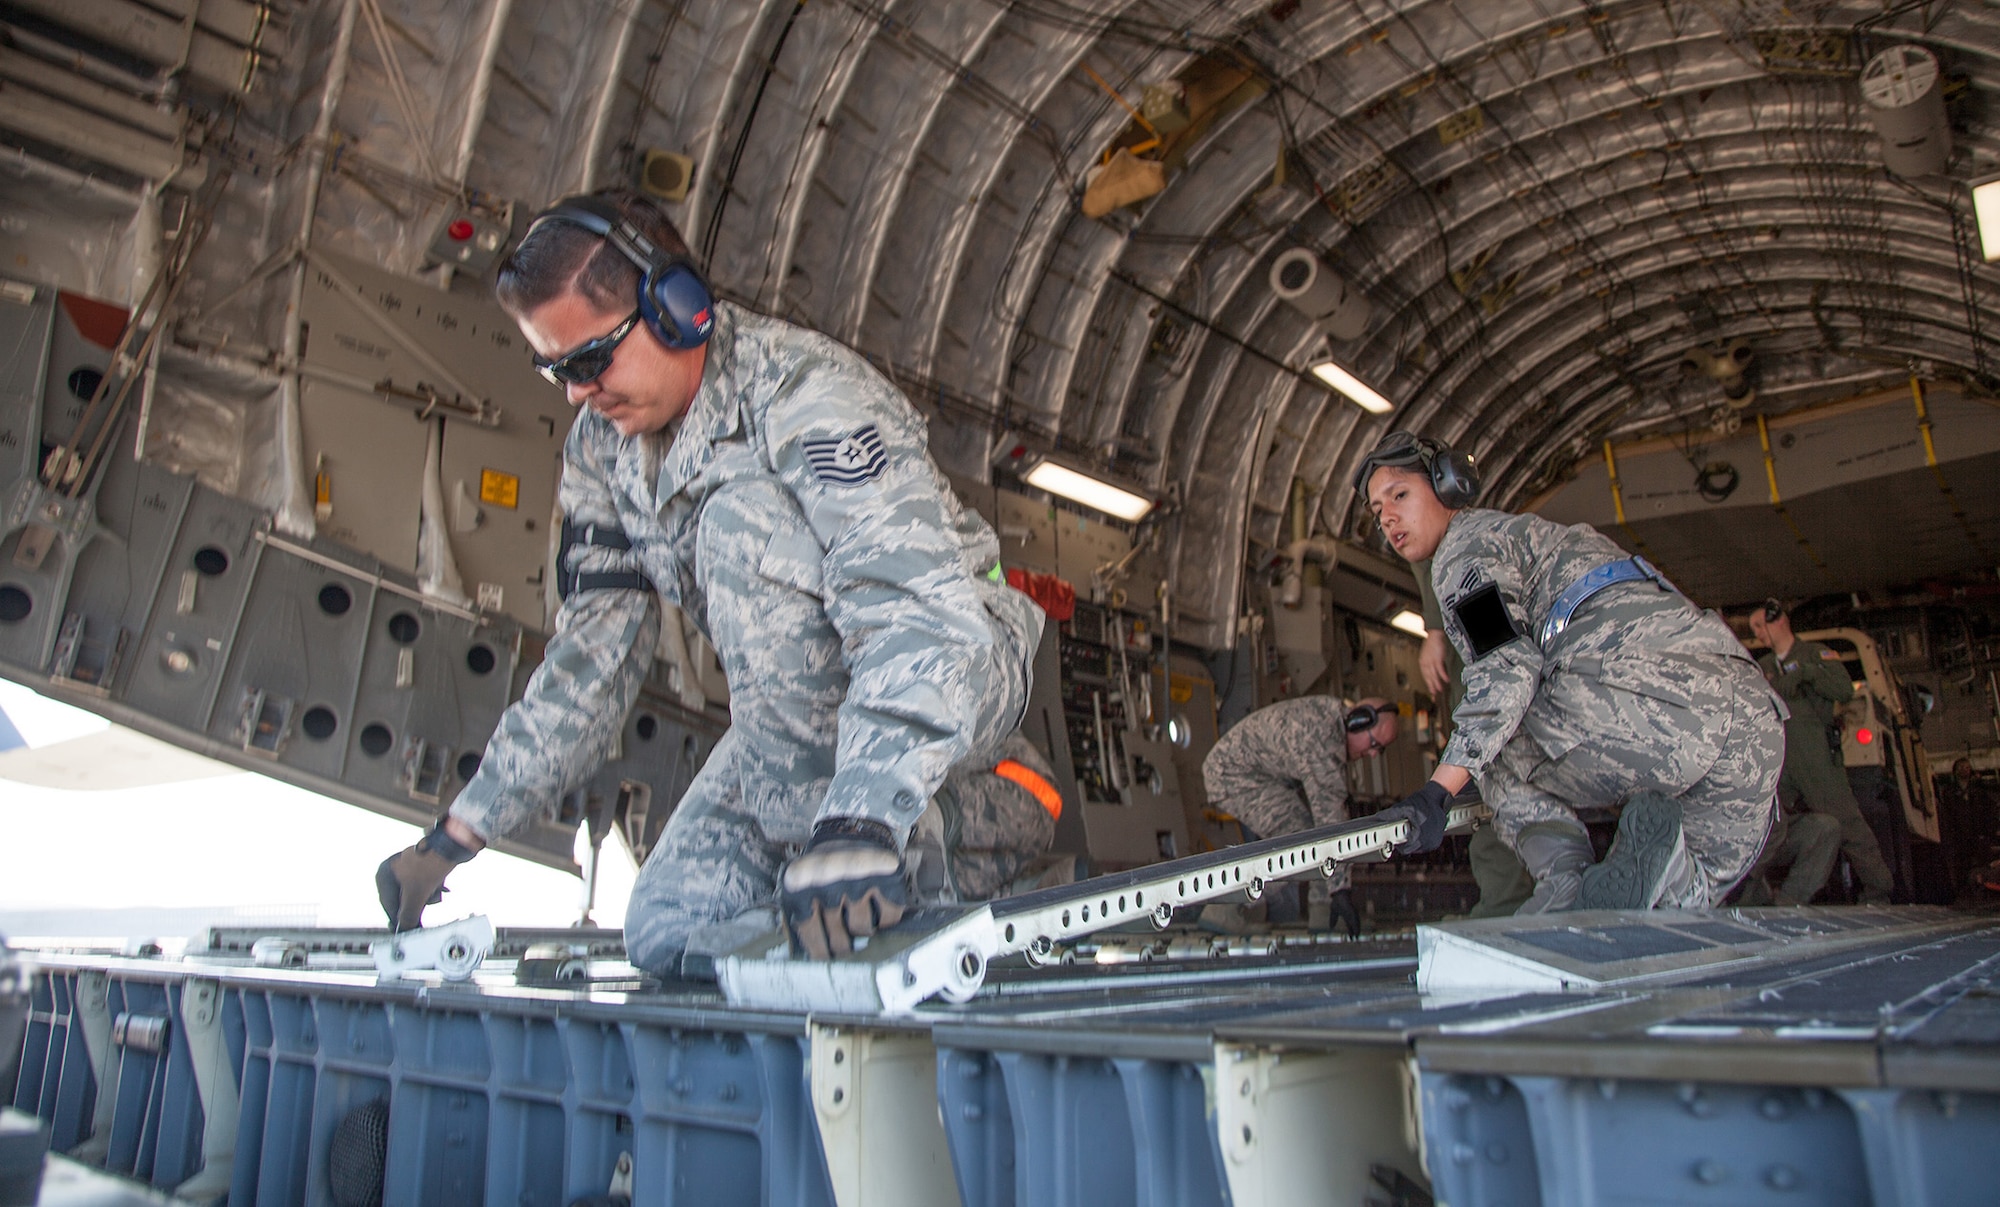 TRAVIS AIR FORCE BASE, Calif. -- Tech. Sgt. Nathan A. Larios (left), an air transportation specialist with the 55th Aerial Port Squadron,  and Senior Airman Alyssa L. Pafford, an air transportation specialist with the 82nd APS, change the configuration of a C-17 Globemaster III cargo ramp from pallets to rolling stock at Travis Air Force Base, Calif., Feb. 23, 2014. During the Unit Training Assembly of Feb. 22-23, squadrons from across the 349th Air Mobility Wing conducted interrelated exercise scenarios, providing Reservists opportunities to achieve core skill proficiency training.   On this particular C-17 Globemaster III aeromedical evacuation sortie,  key training events were achieved for members from the 349th Operations, Maintenance, Support and Medical Groups. (U.S. Air Force photo / Lt. Col. Robert Couse-Baker)